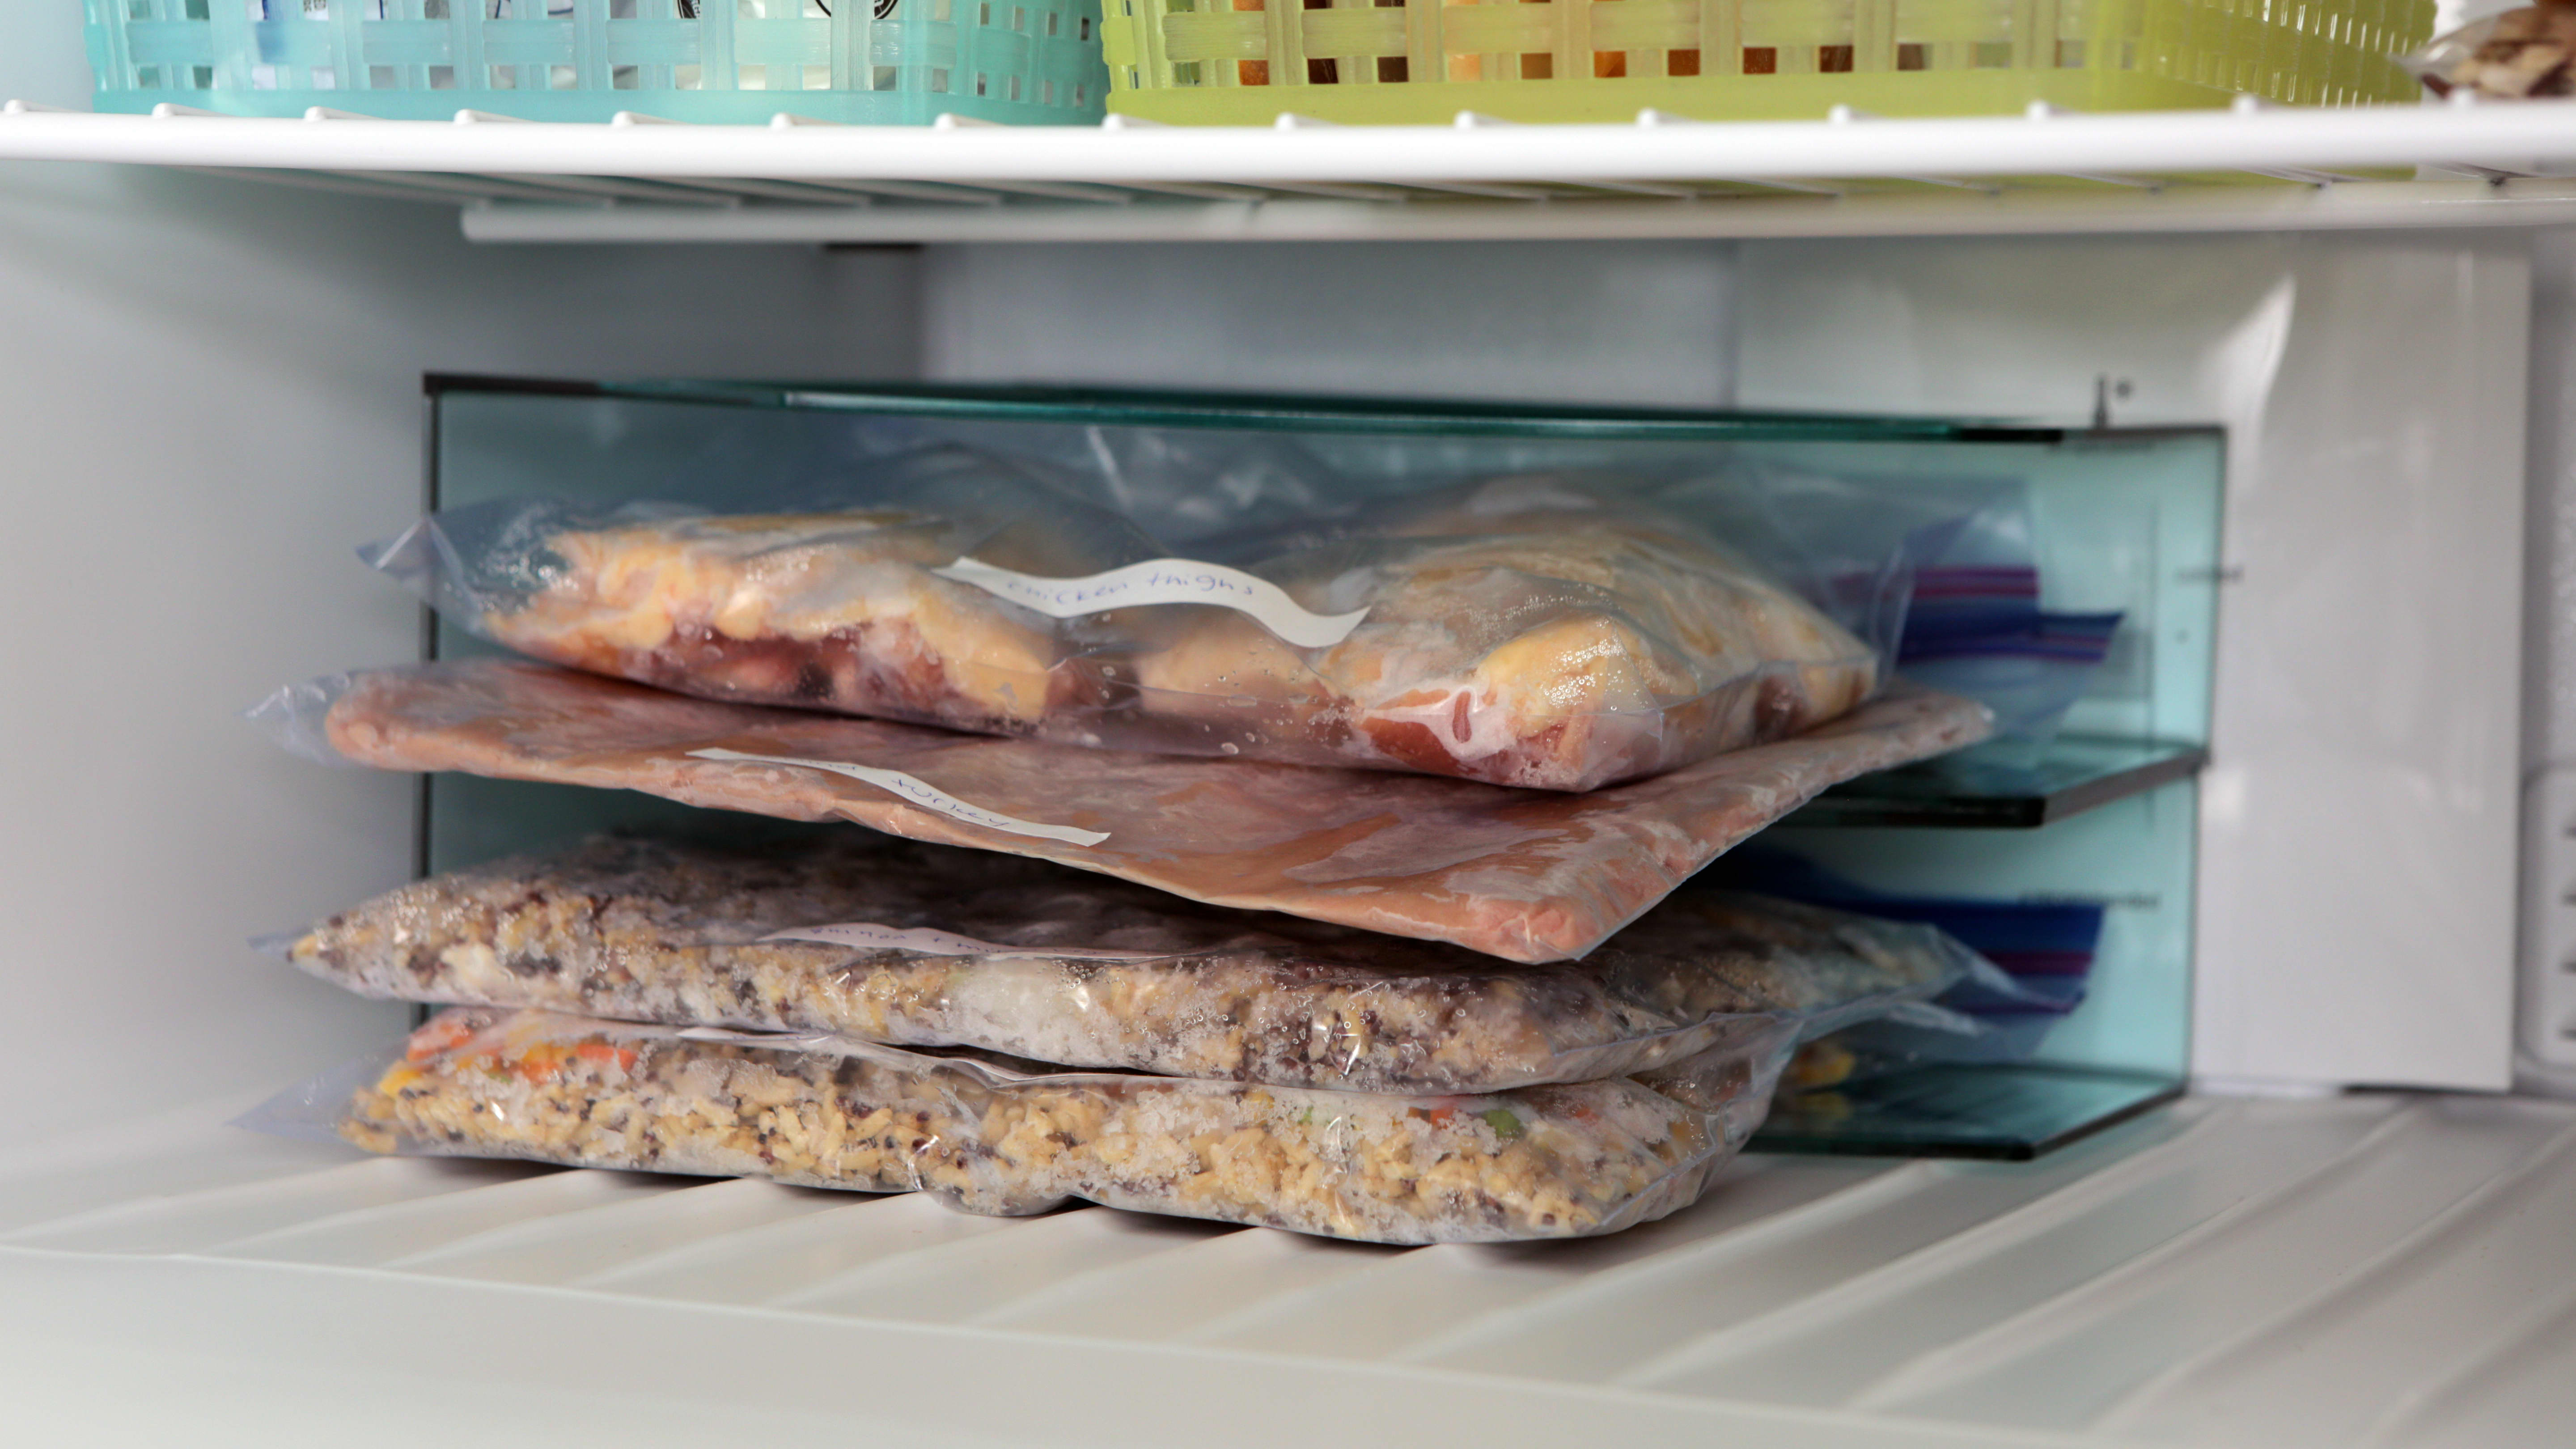 How to Organize Your Freezer - A Pretty Life In The Suburbs